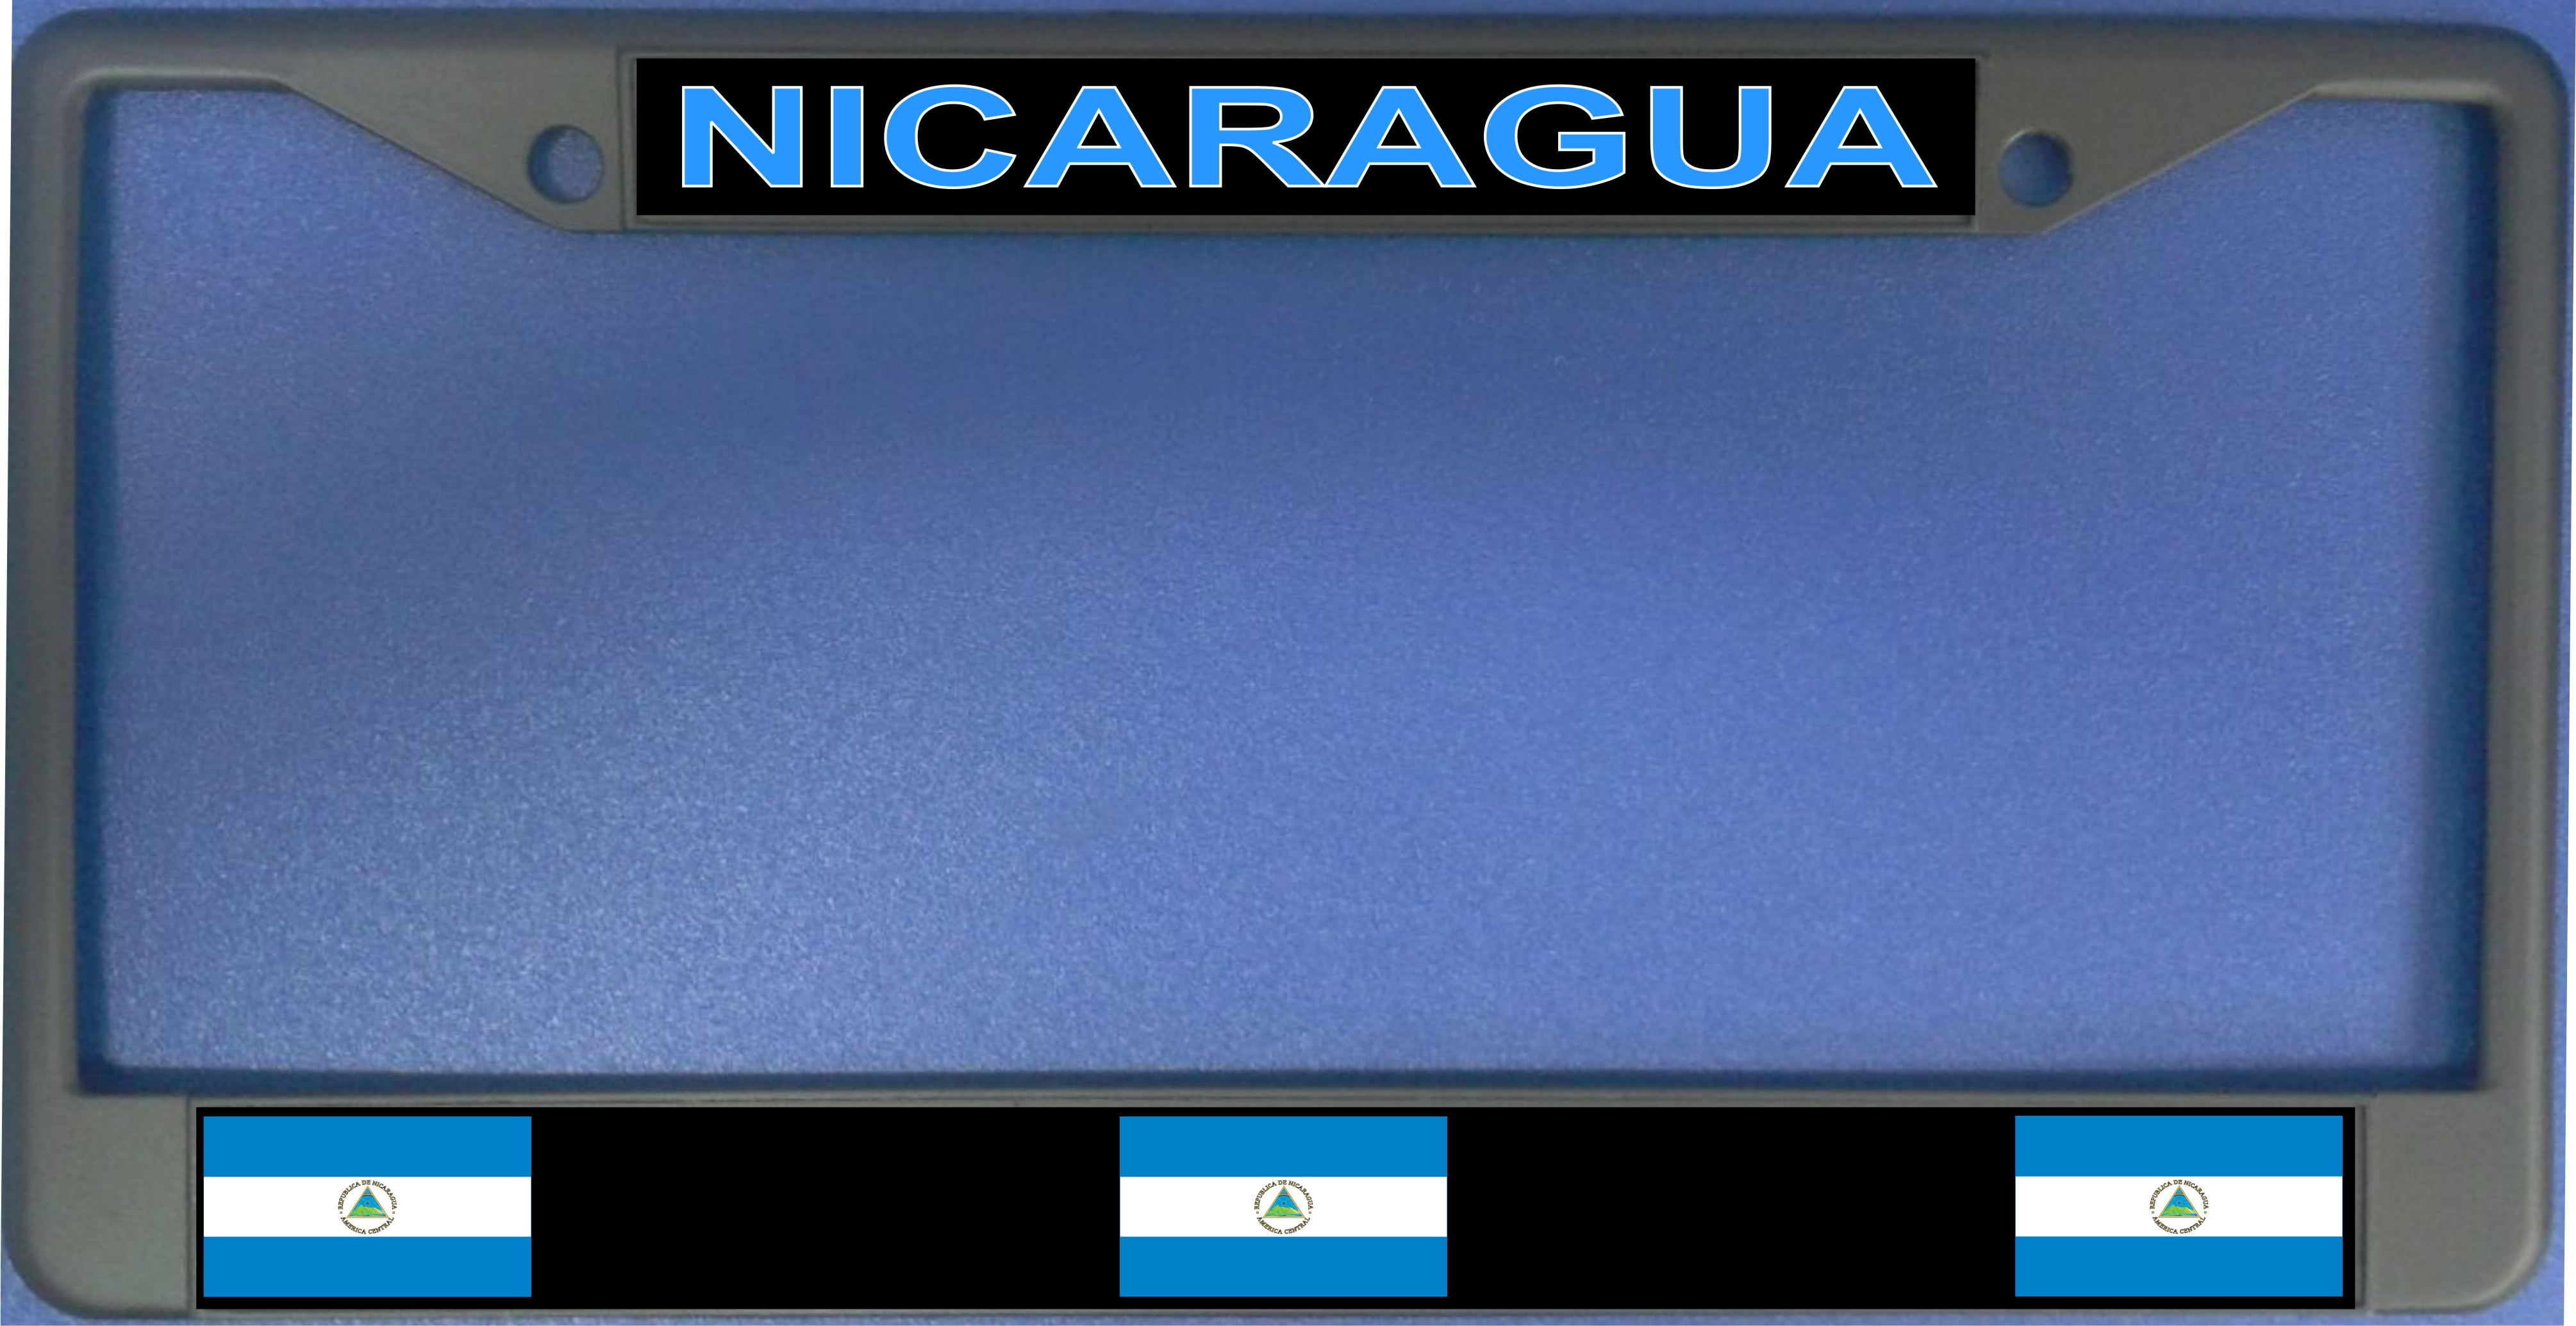 Nicaragua Flag Photo License Plate Frame   Free SCREW Caps with this Frame